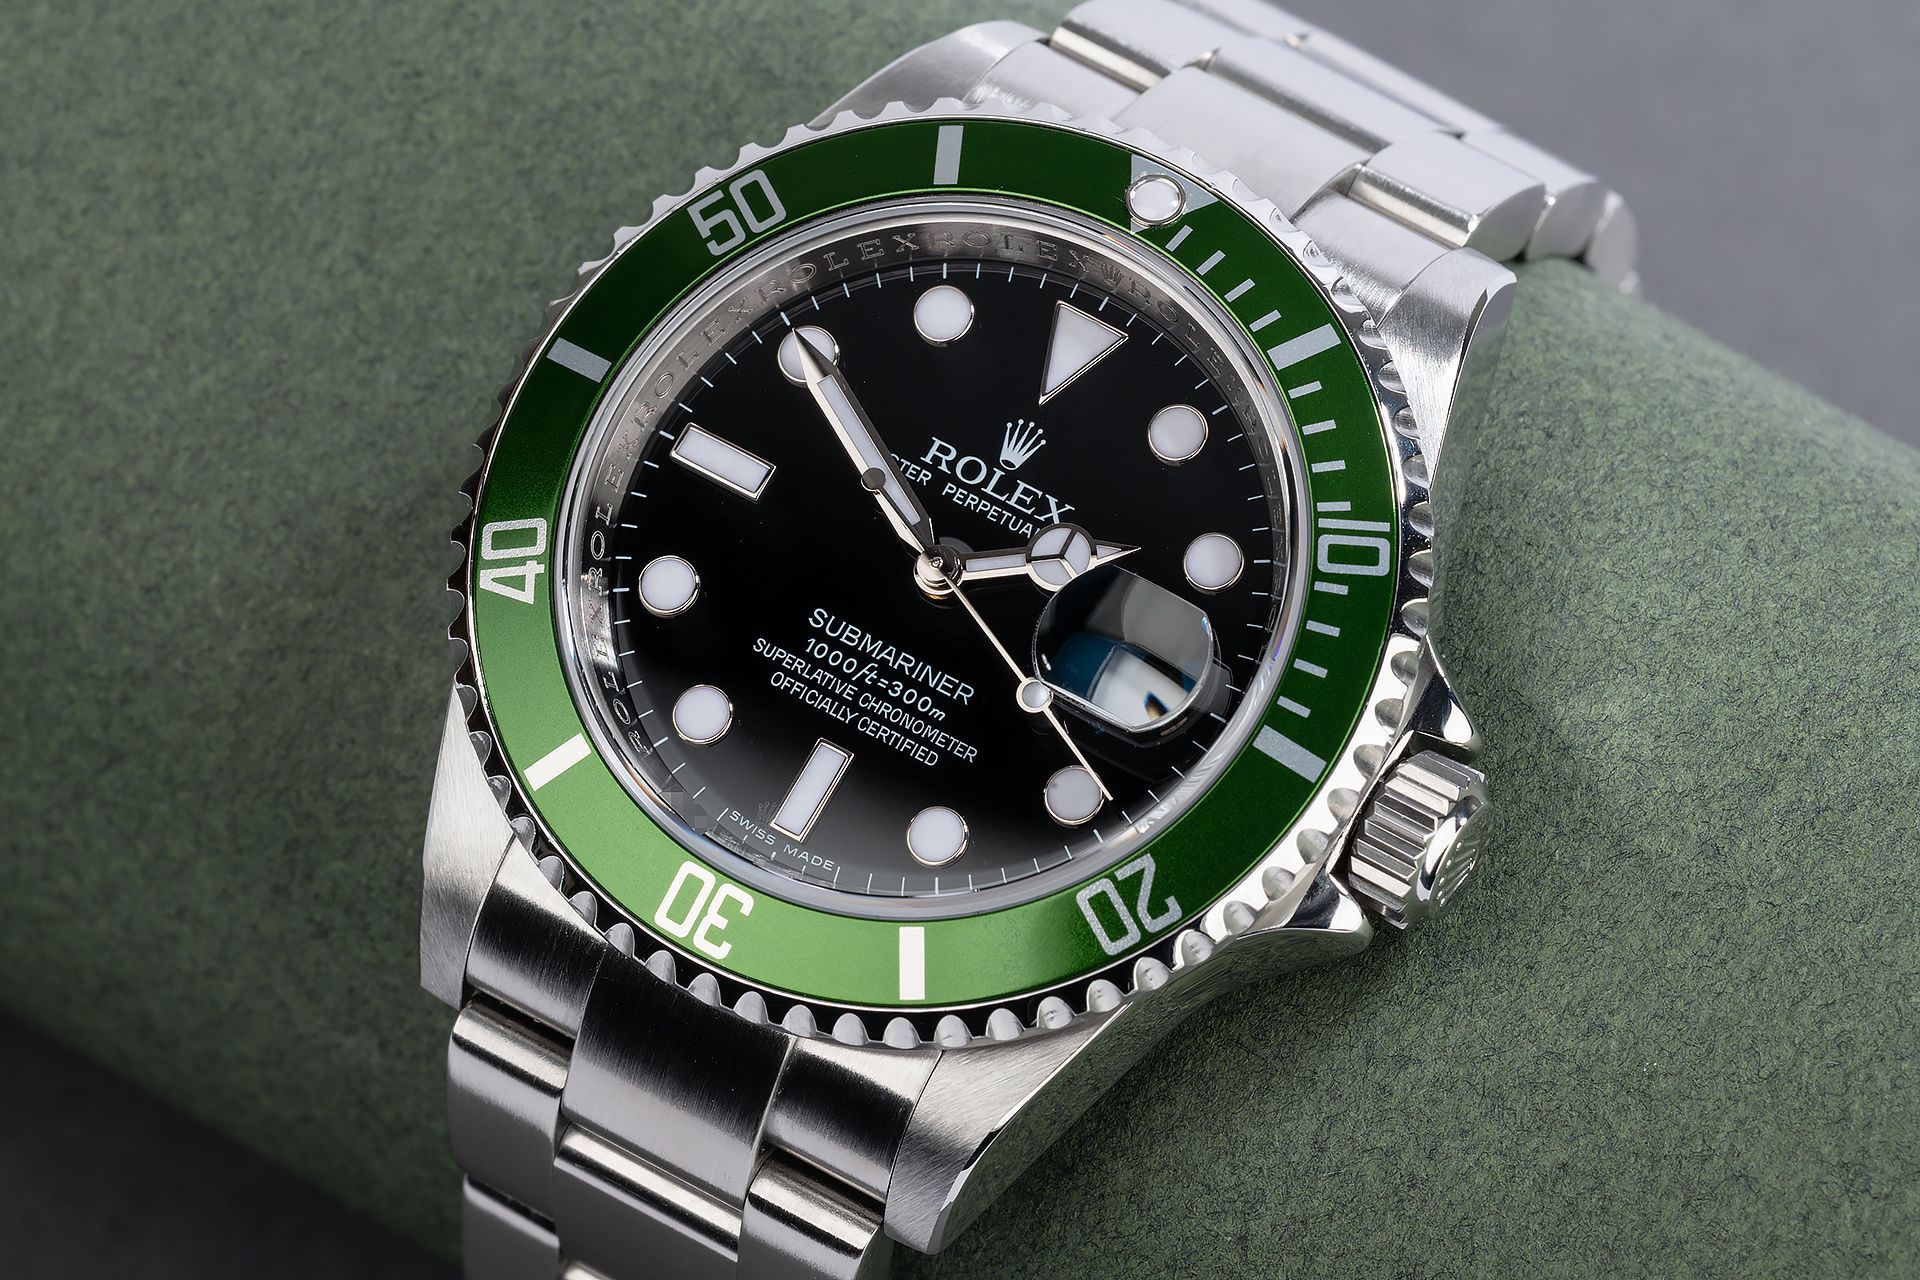 ref 16610LV | 'Complete Set' Box & Papers | Rolex Submariner Date